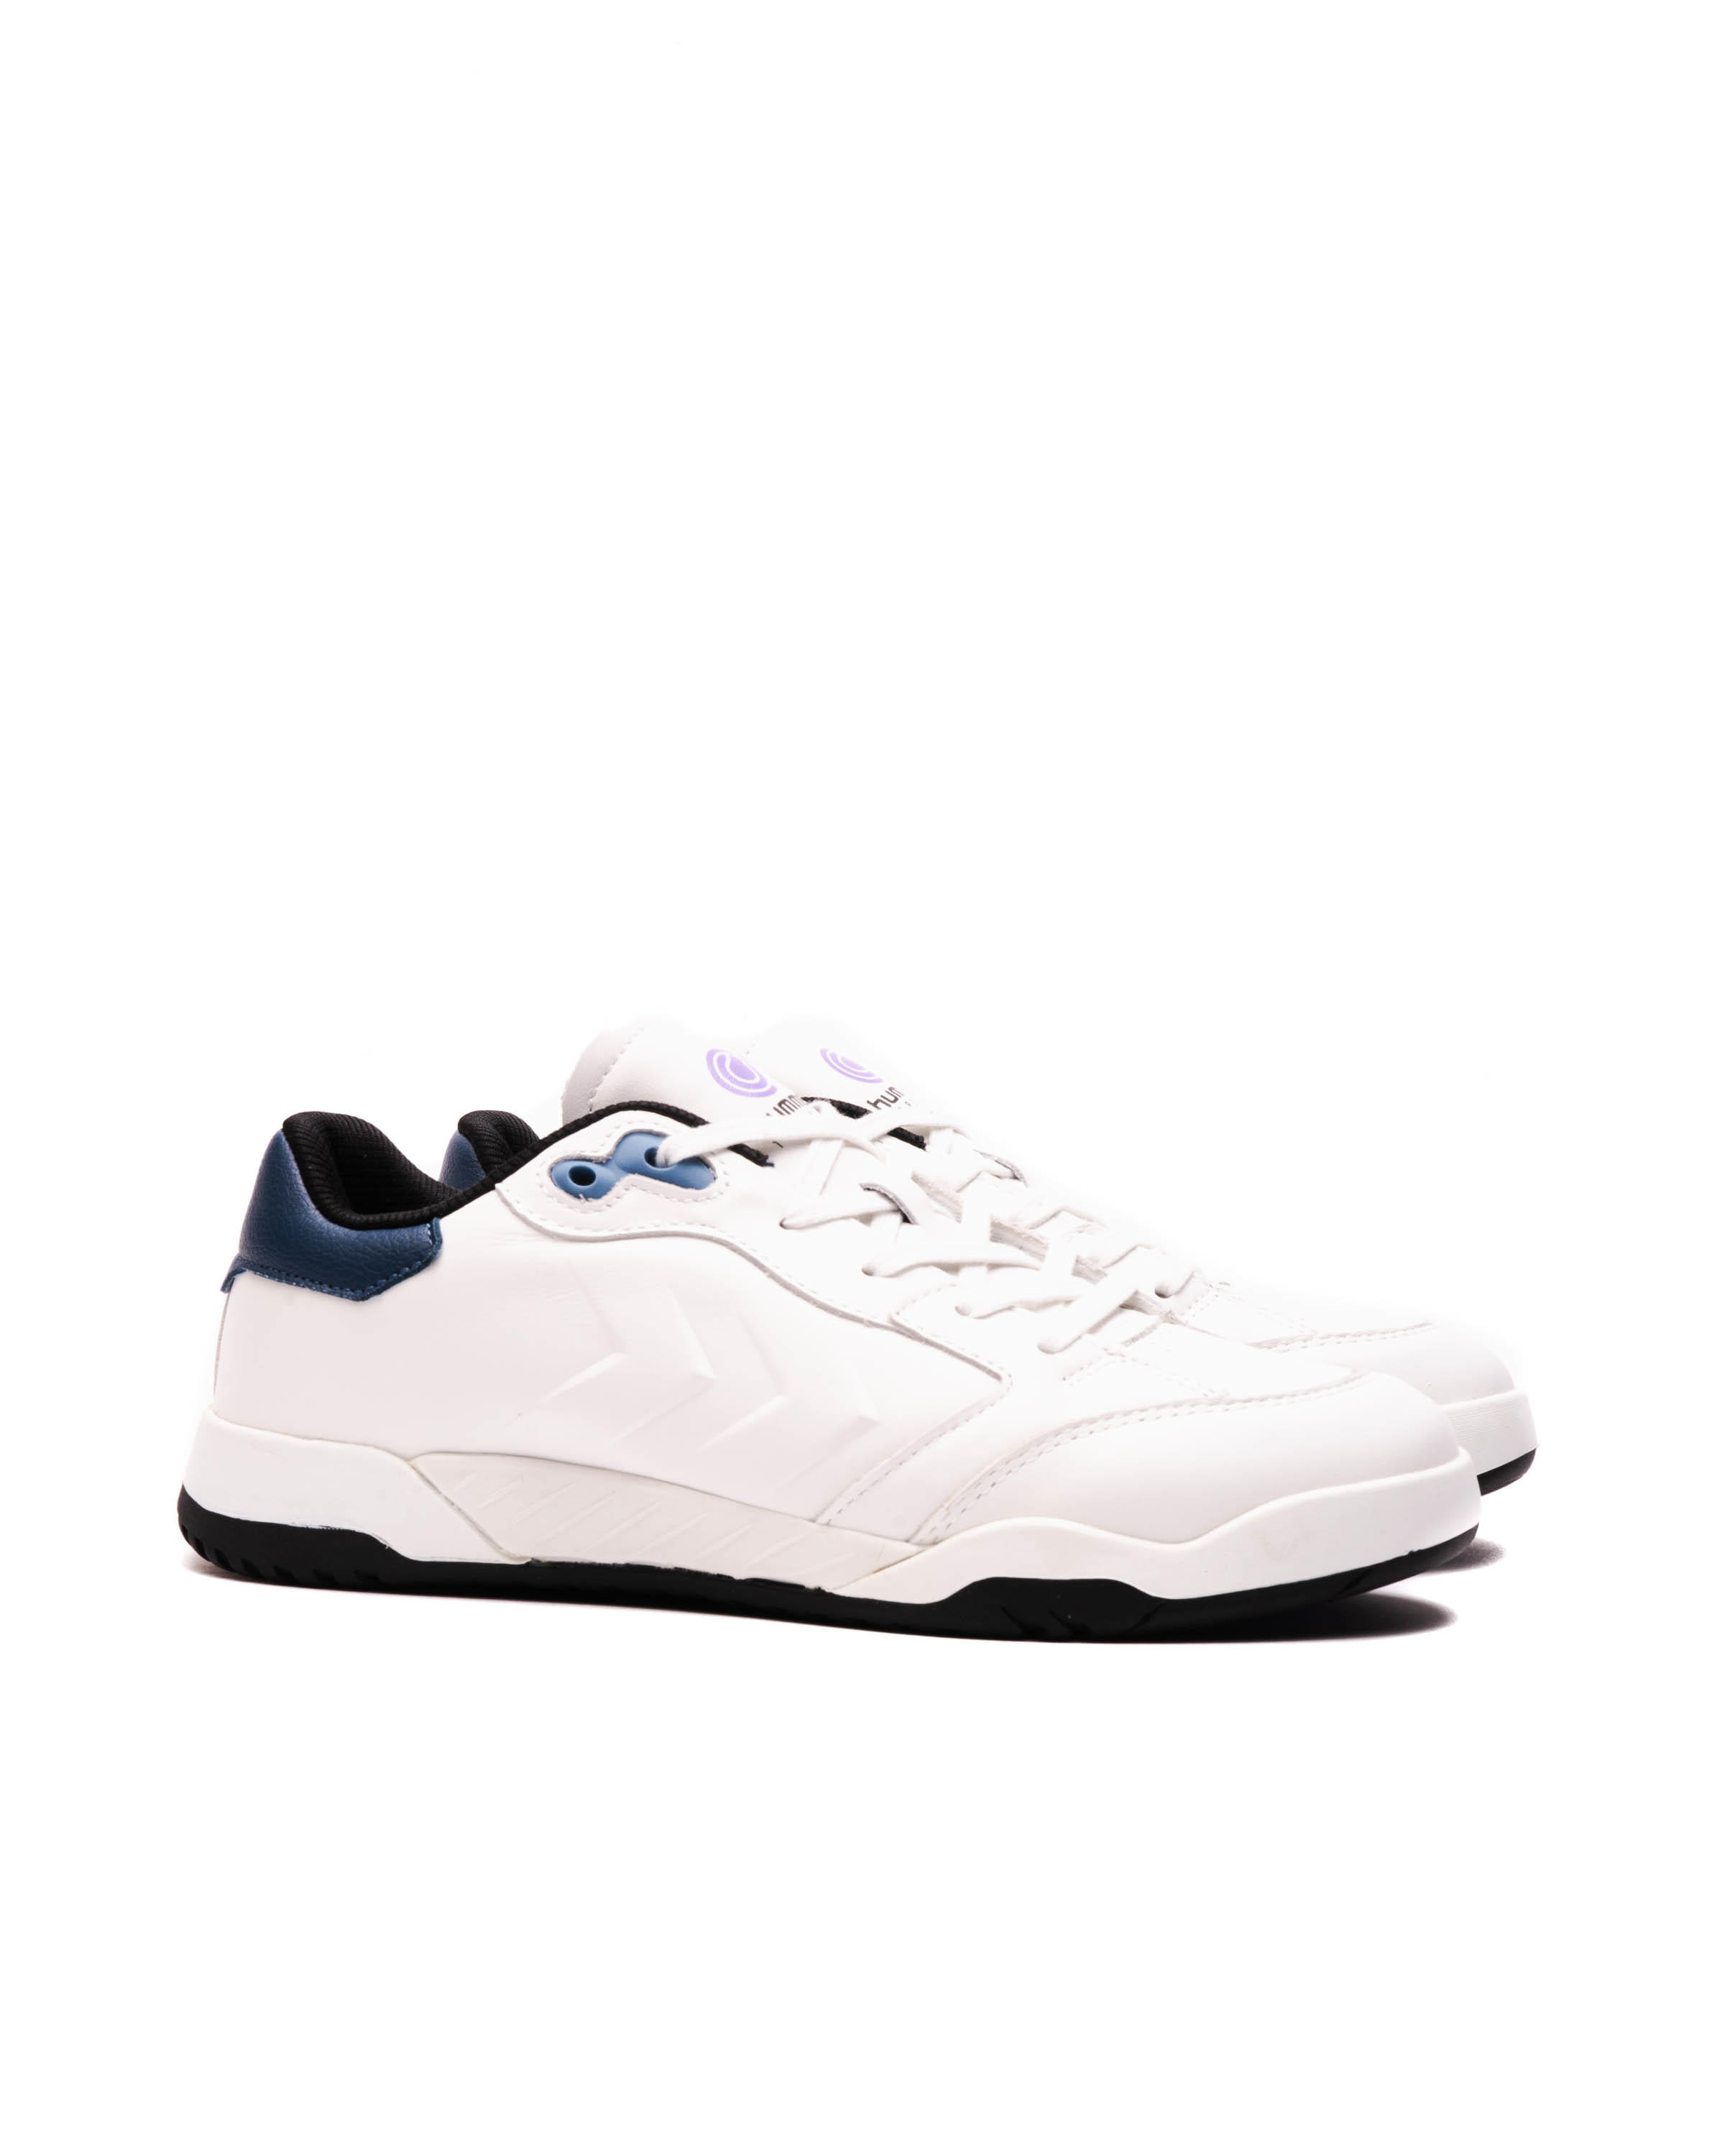 Hummel TOP SPIN REACH LX-E ARCHIVE